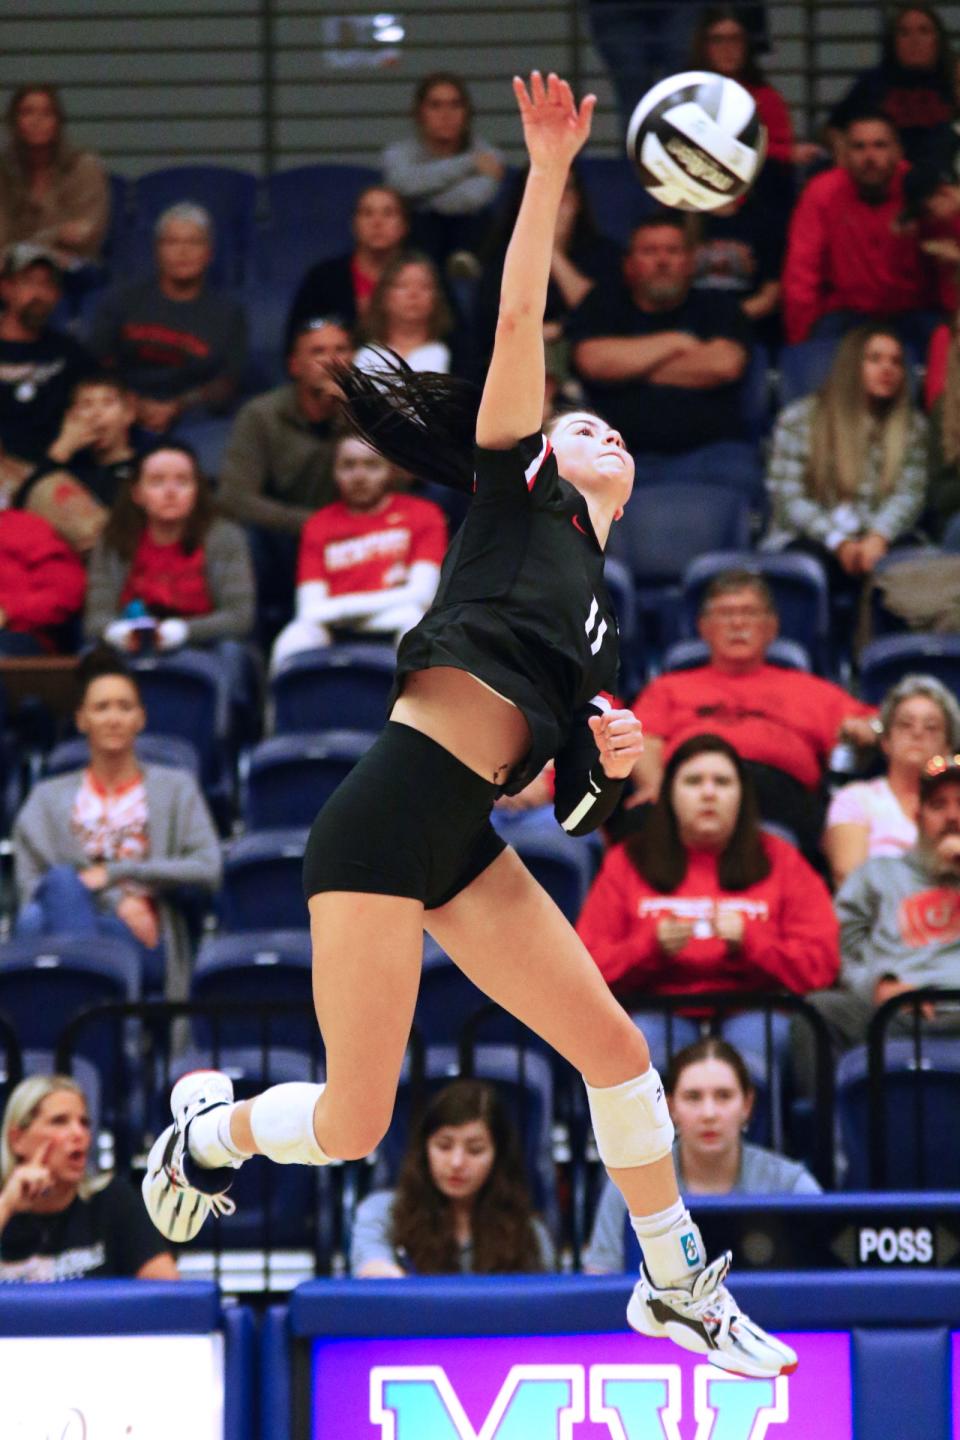 Cardington's Audrey Brininger goes up for a kill against Pleasant during a Division III volleyball district championship match Saturday night at Mount Vernon Nazarene's Ariel Arena.